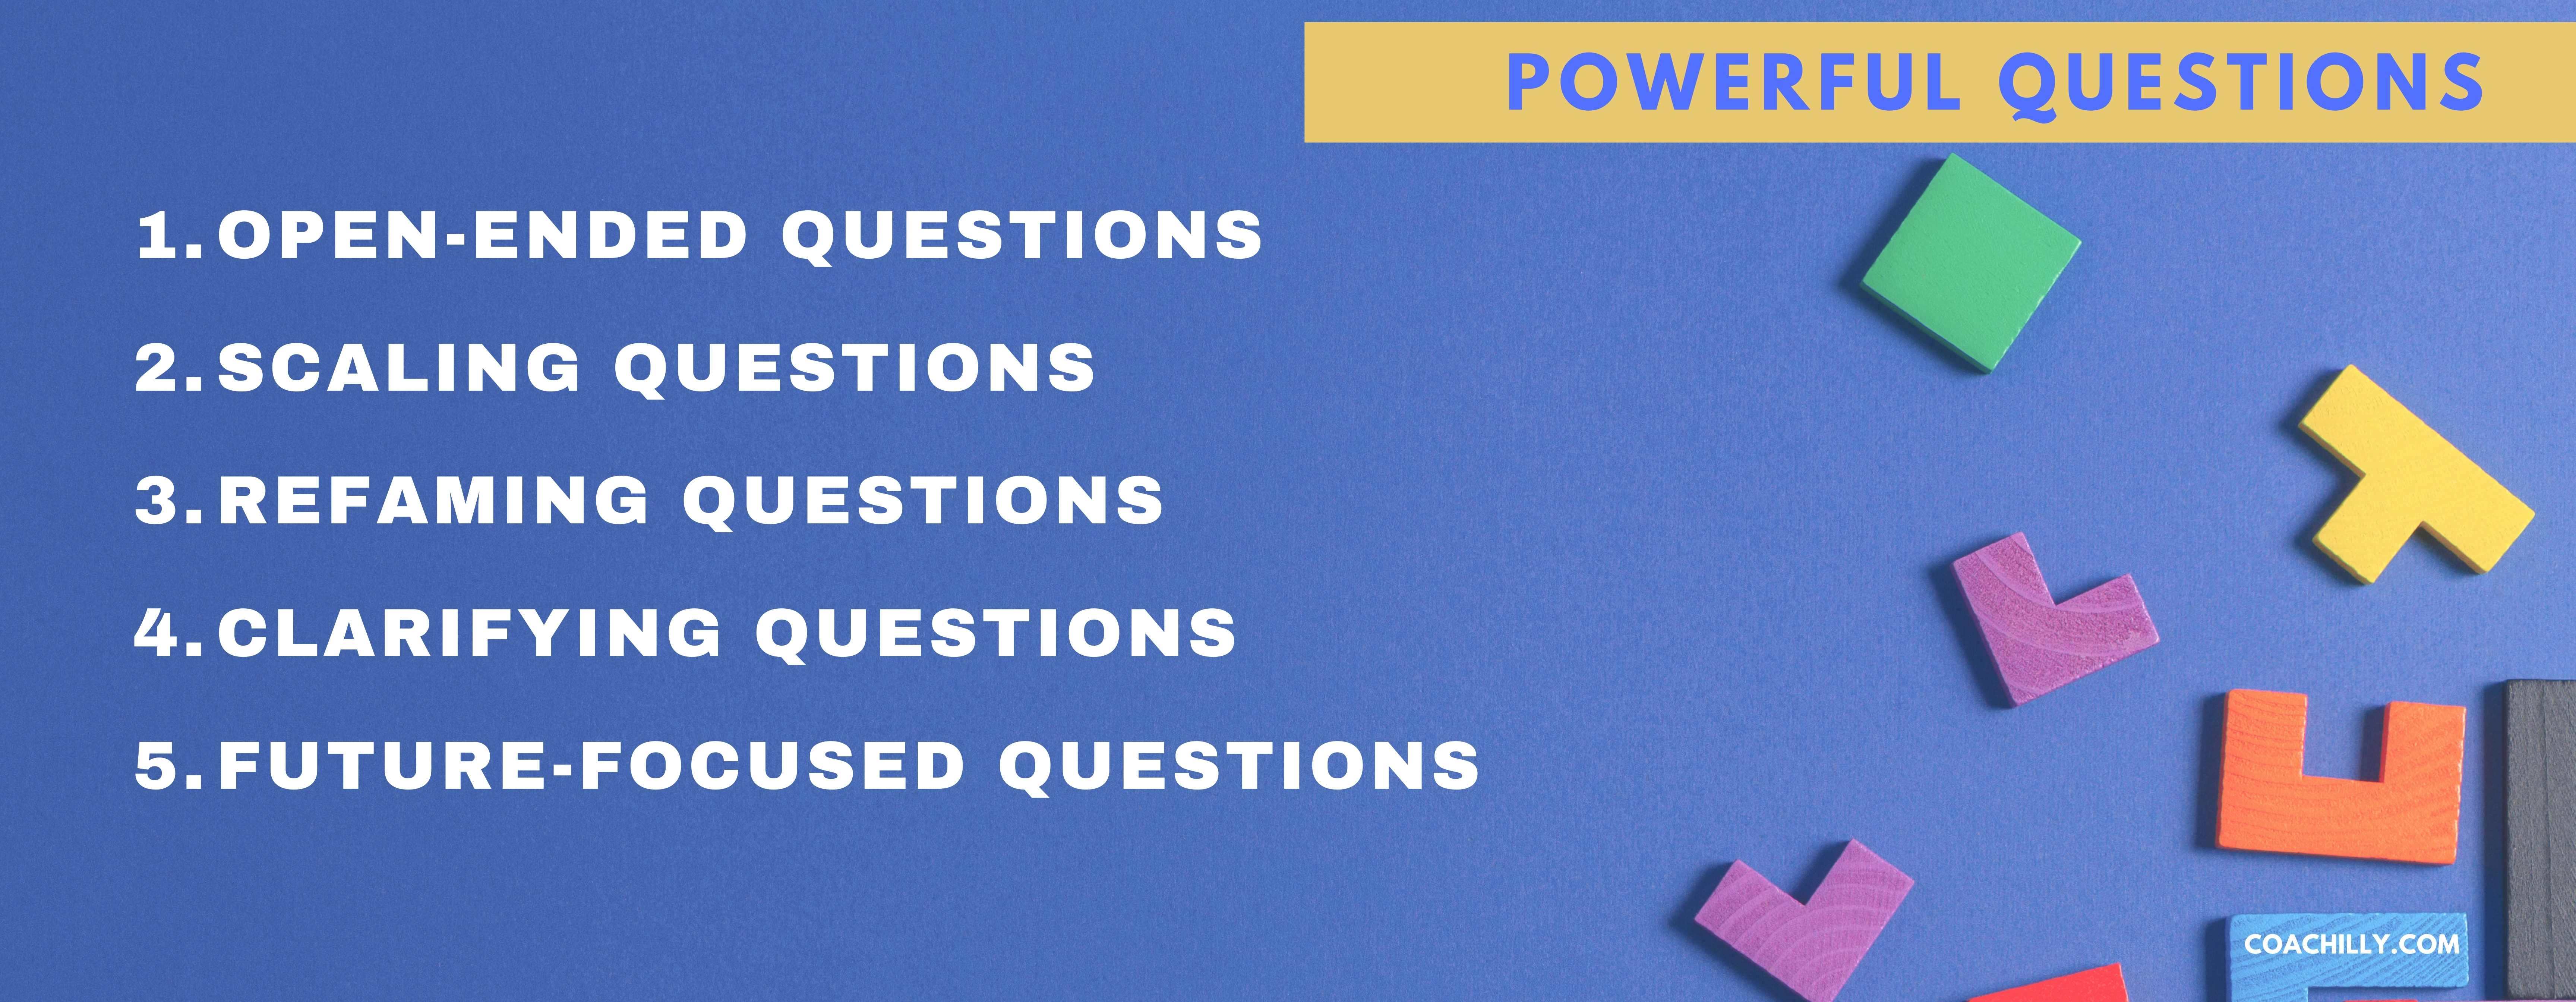 5 Types of Powerful Questions in Coaching - Article on effective coaching techniques